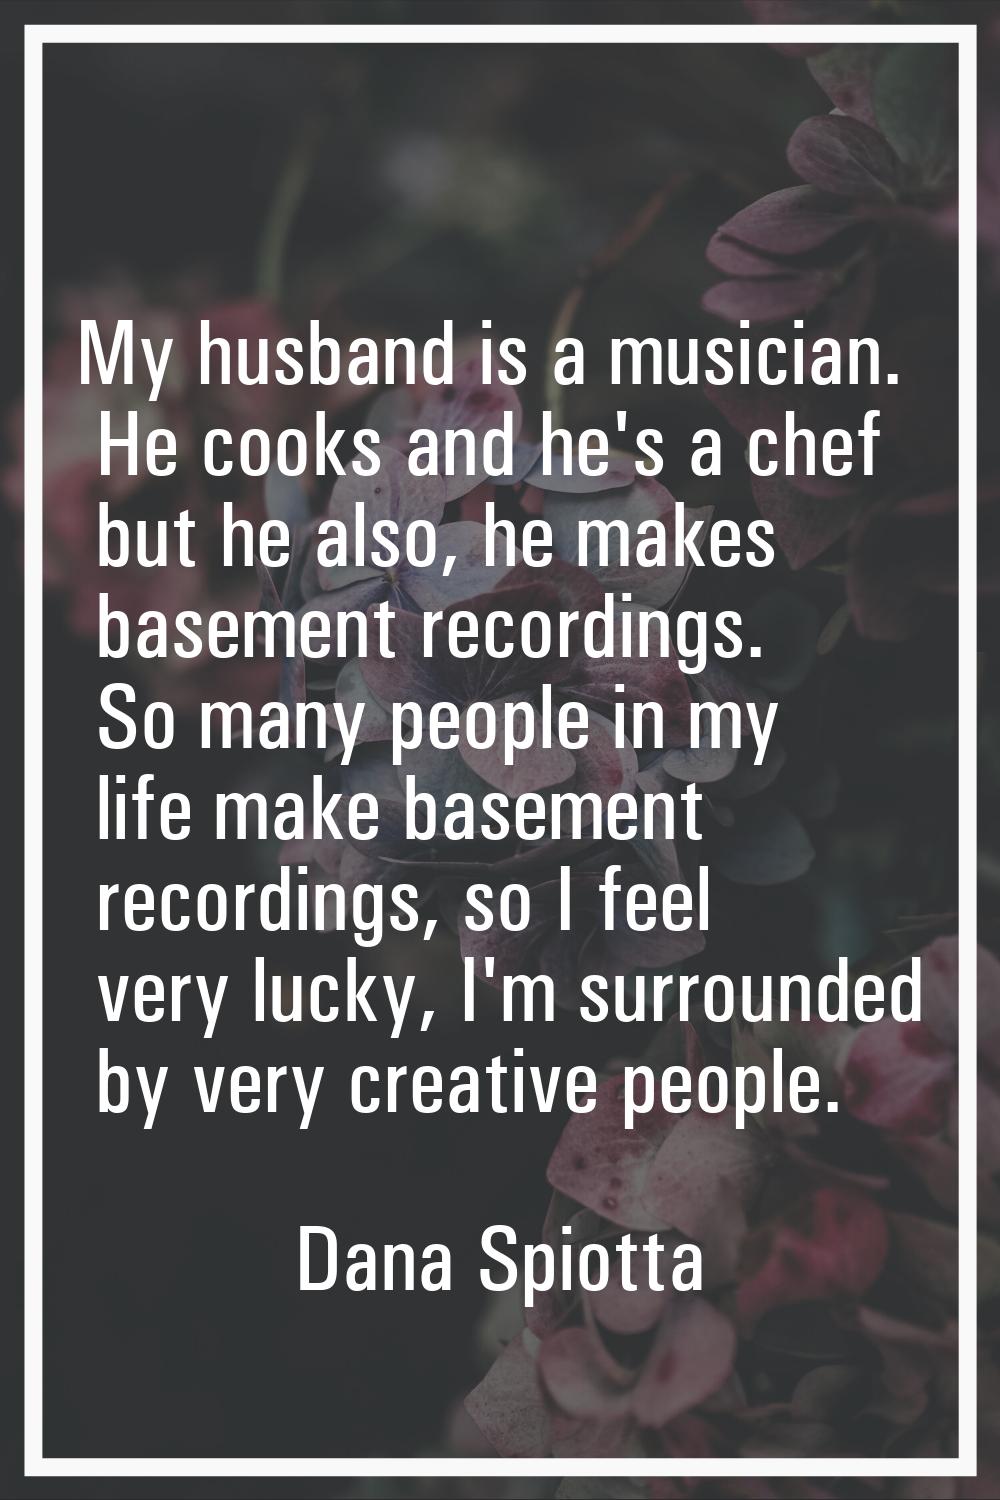 My husband is a musician. He cooks and he's a chef but he also, he makes basement recordings. So ma